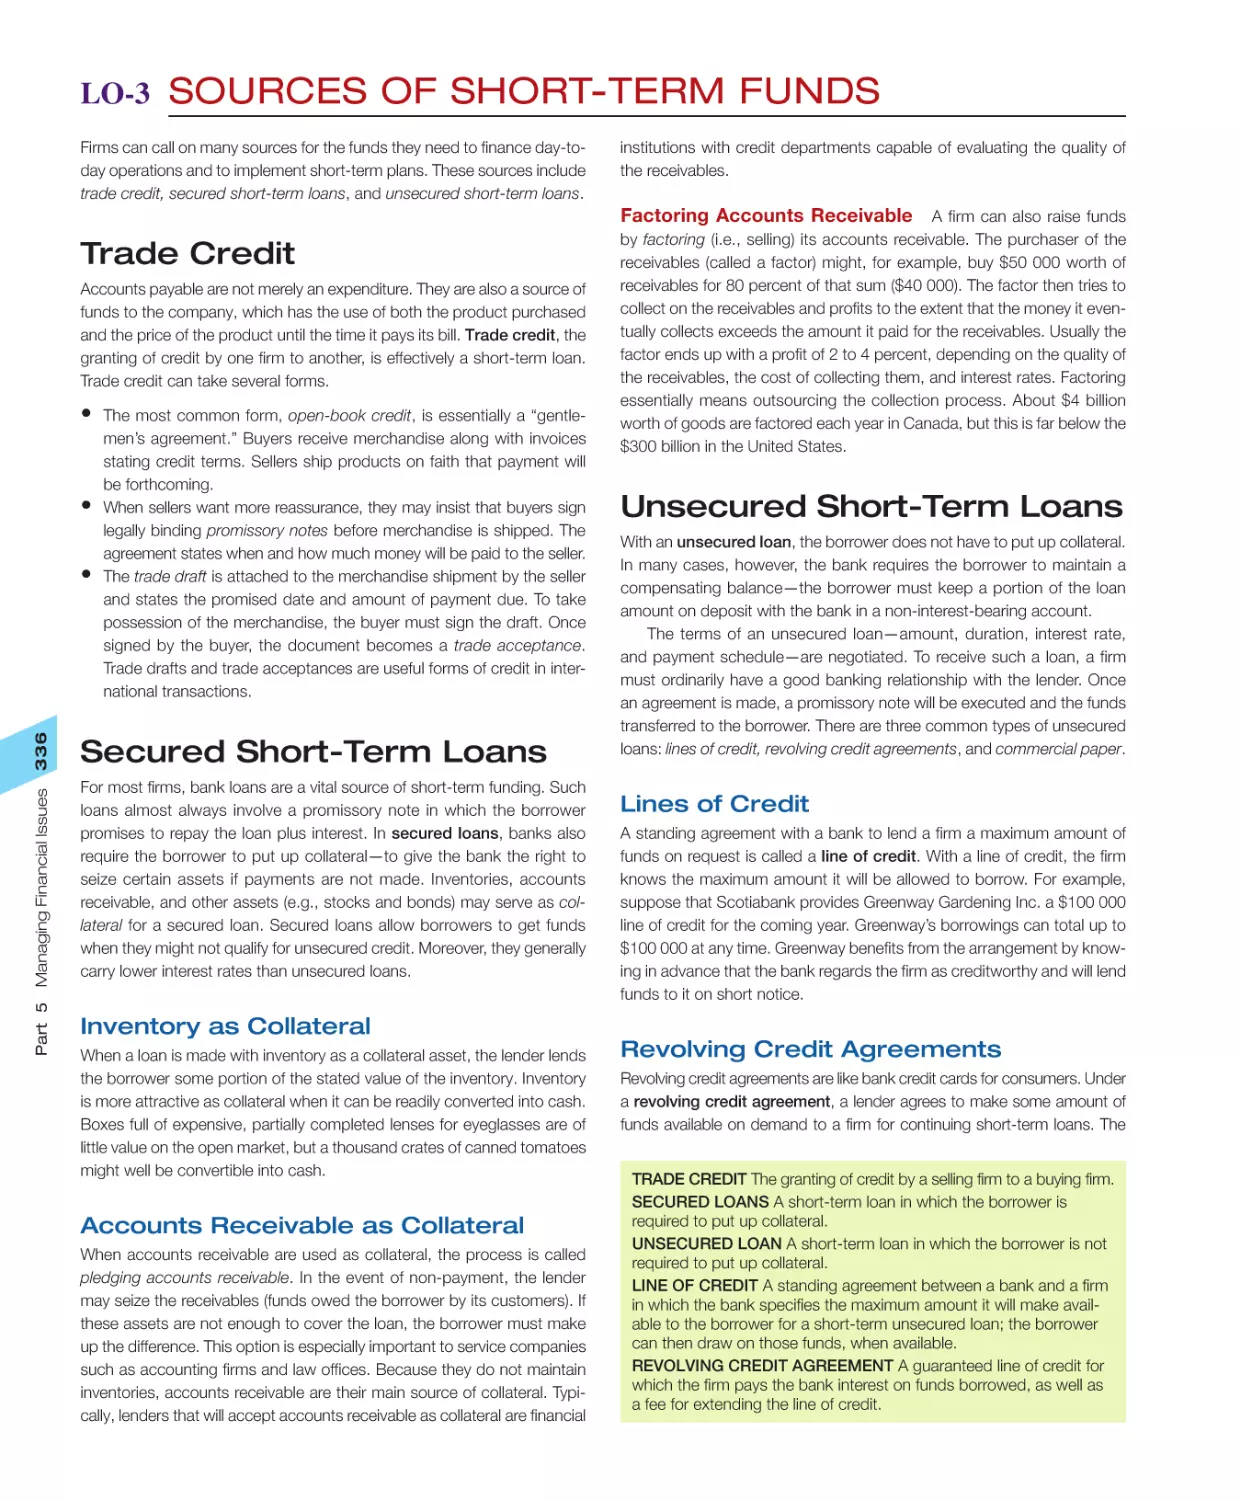 LO‐3 Sources of Short‐Term Funds
Secured Short‐Term Loans
Unsecured Short‐Term Loans